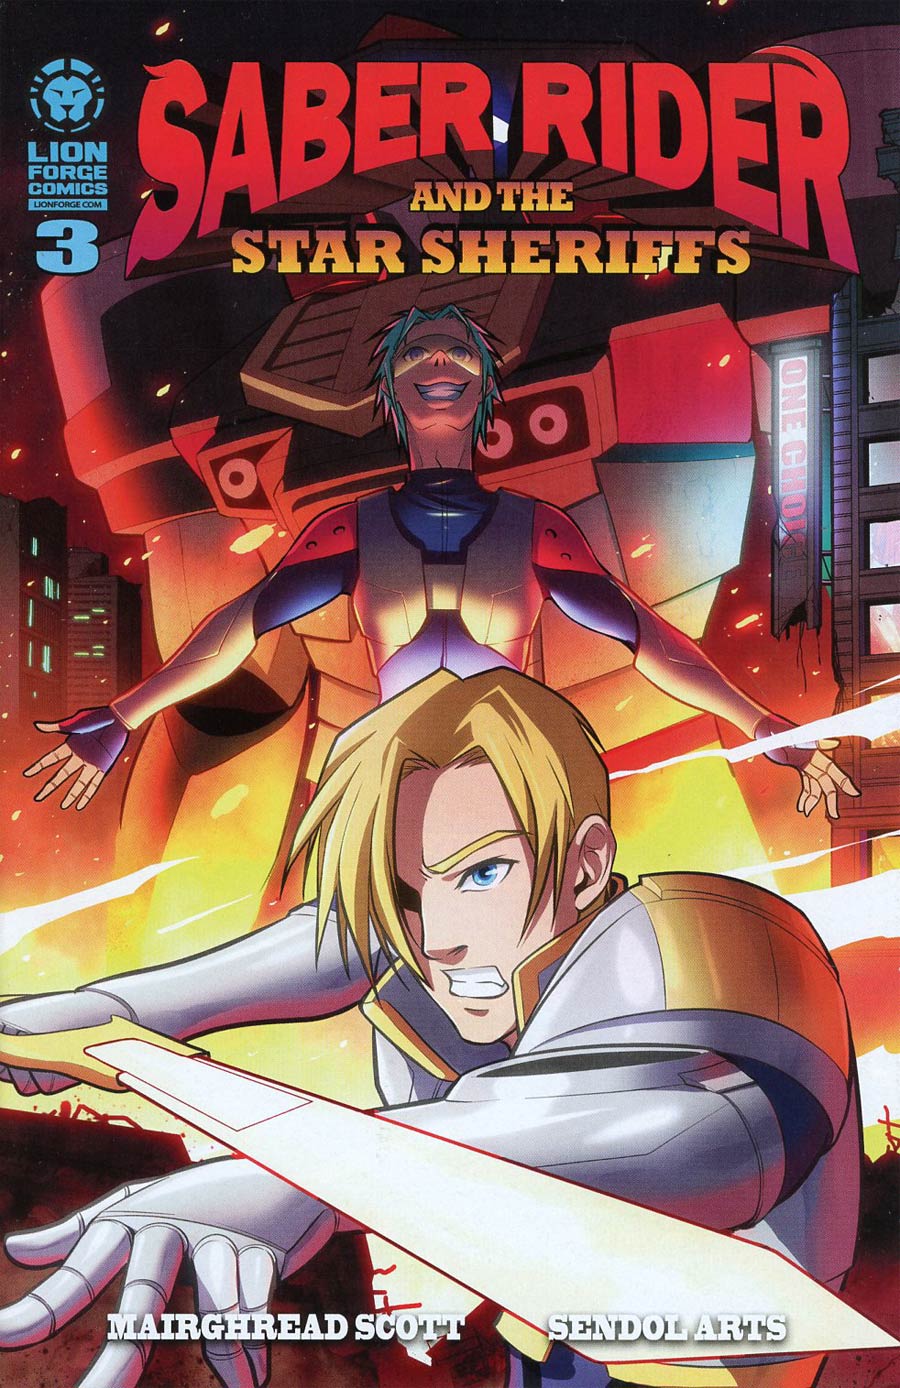 Saber Rider And The Star Sheriffs #3